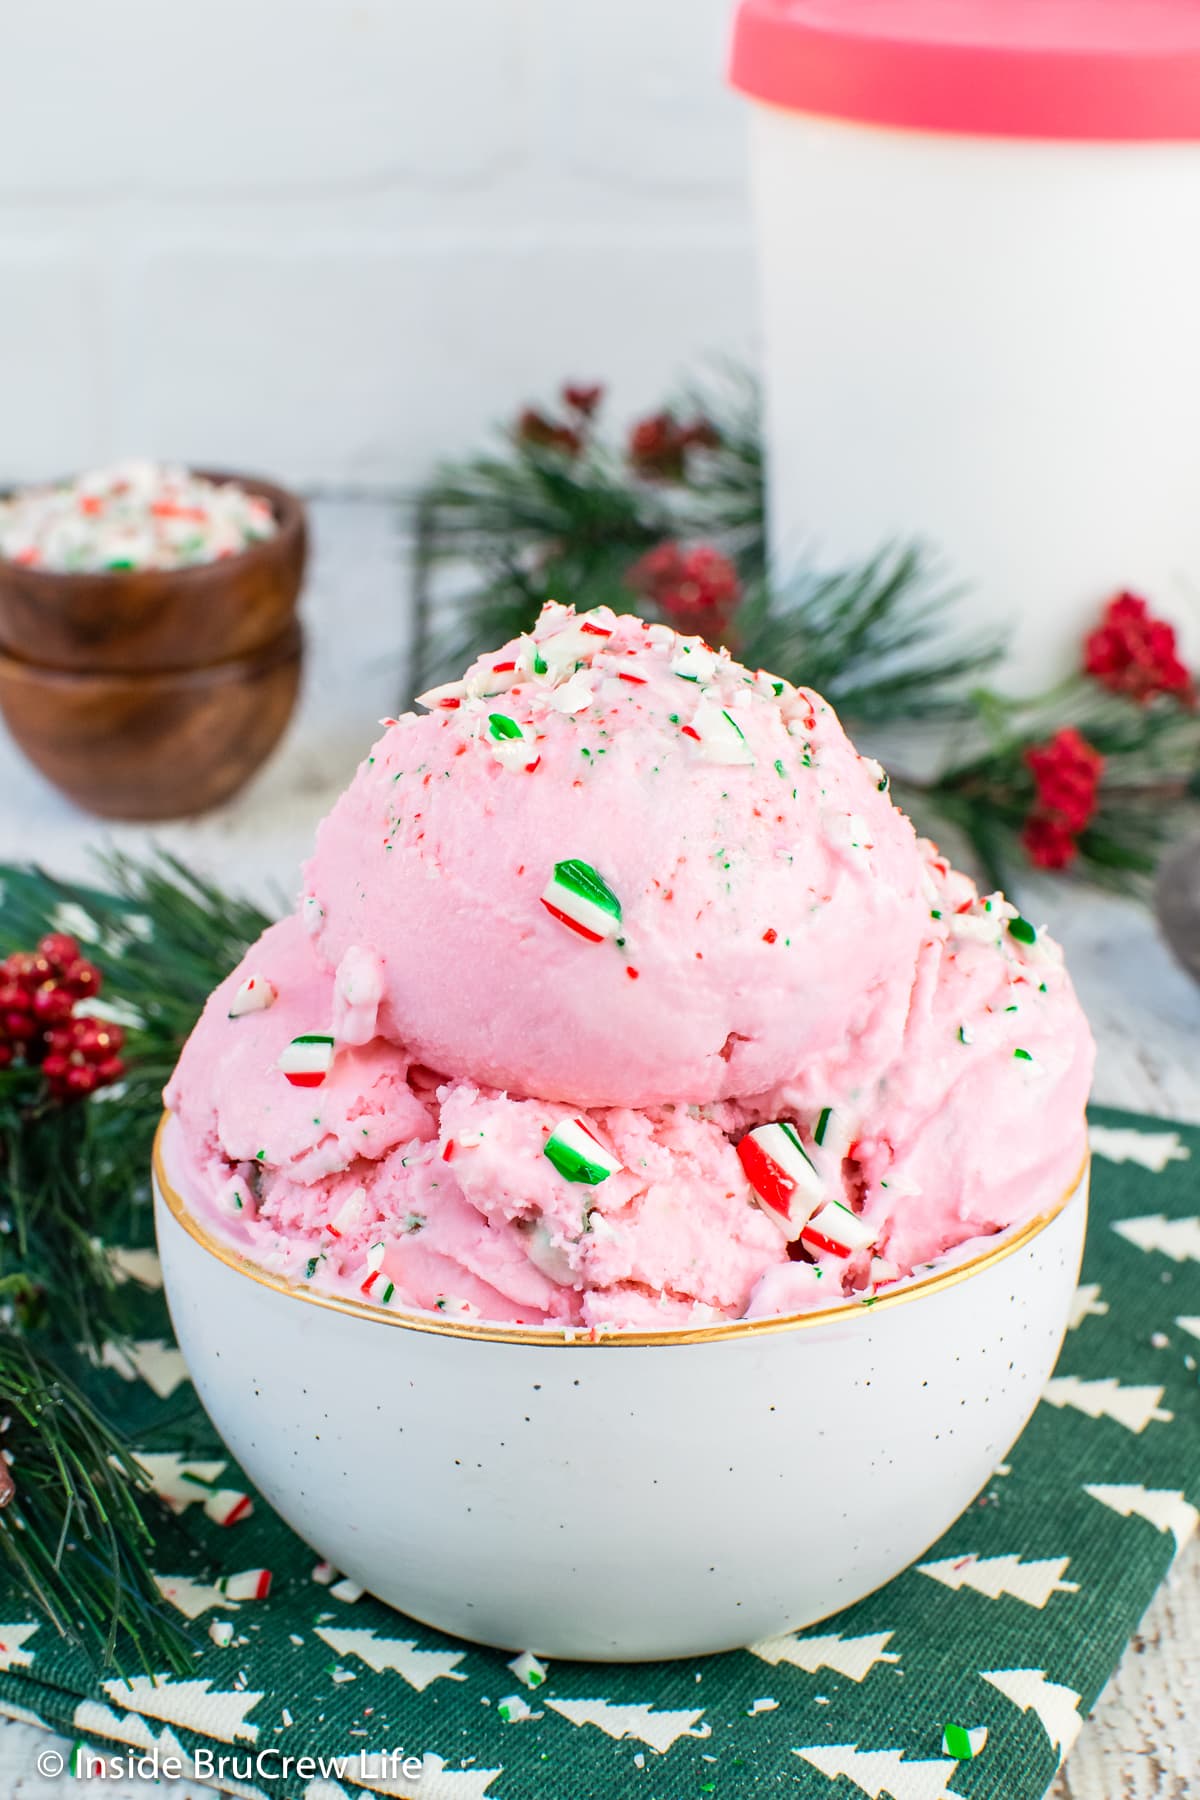 Pink ice cream scoops in a white bowl.